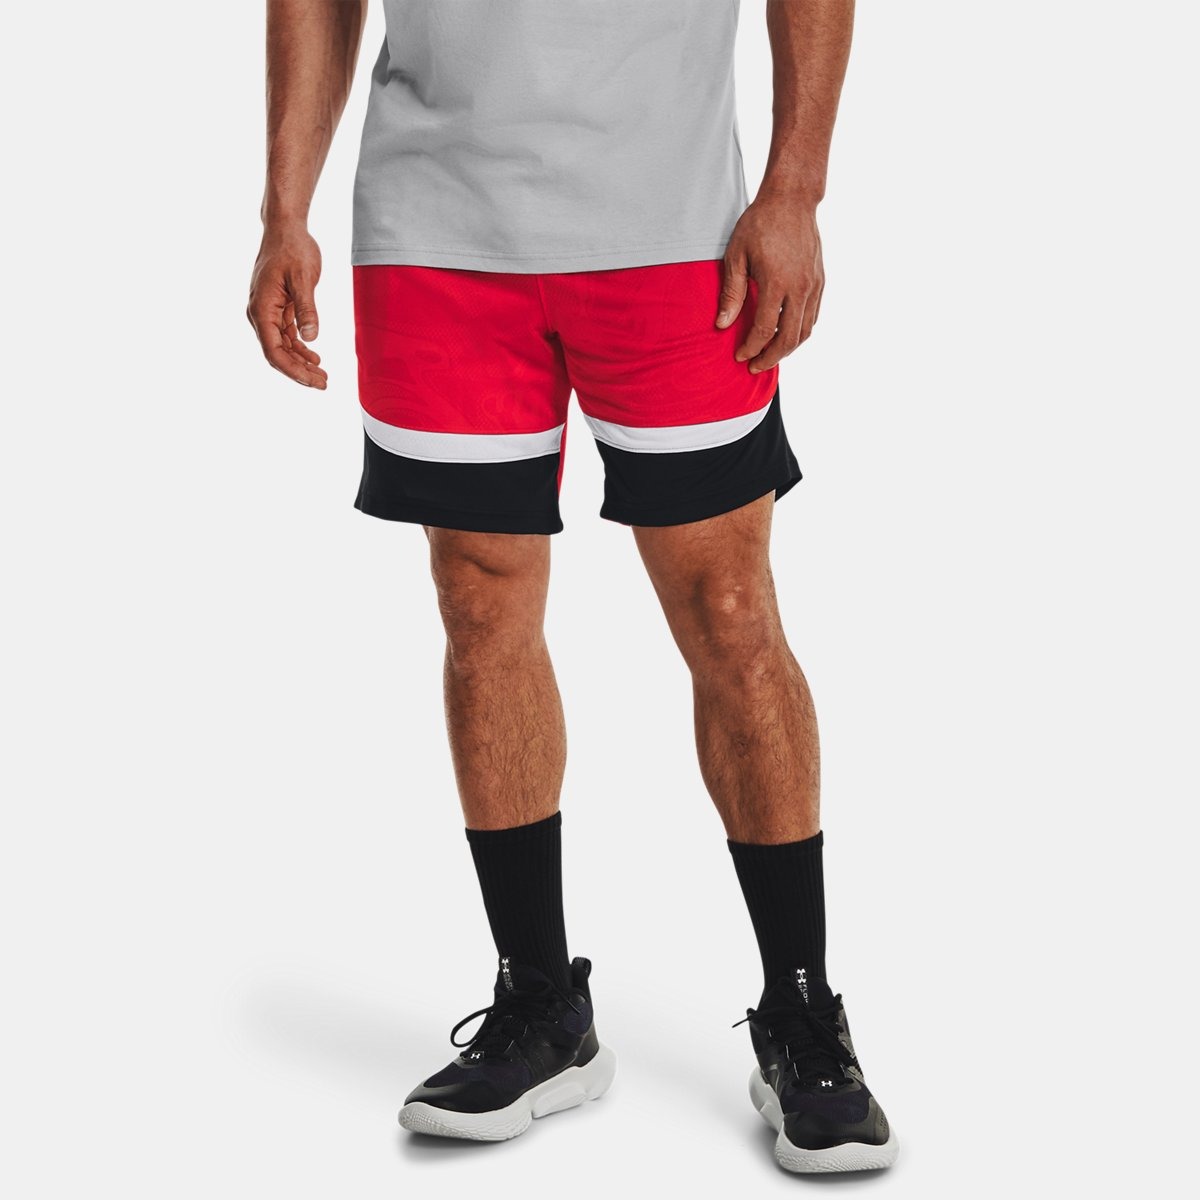 Shorts in Red for Man at Under Armour GOOFASH